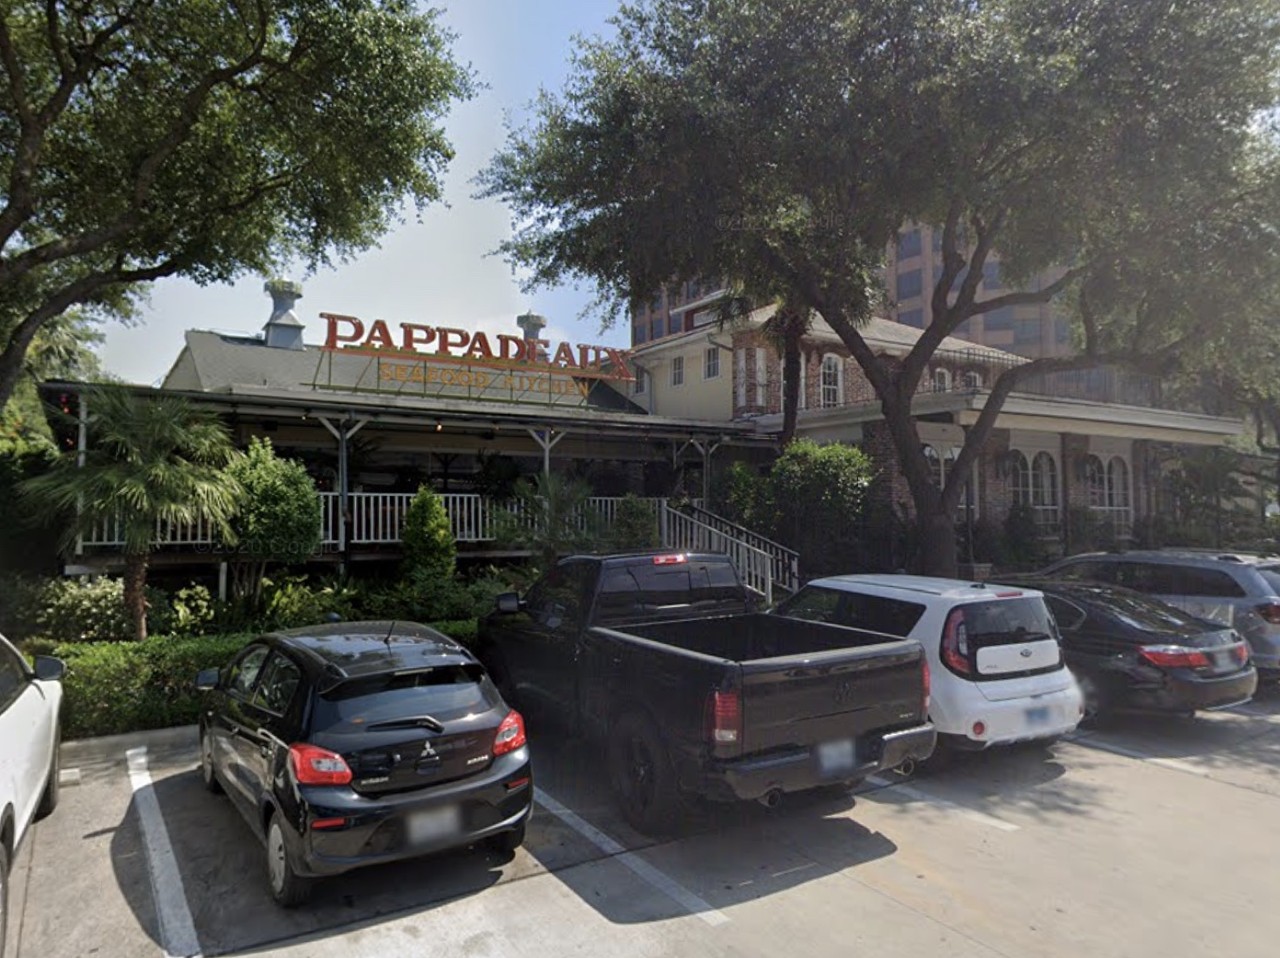 Pappadeaux Seafood Kitchen
Multiple Locations, pappadeaux.com
Founded by members of the Pappas family, this chain — which has two locations in the San Antonio area — offers quality and tasty seafood dishes. Pappadeaux is part of the Pappas family restaurants, headquartered in Houston, and has a sibling in Pappasito's Cantina, which also has a San Antonio outpost.